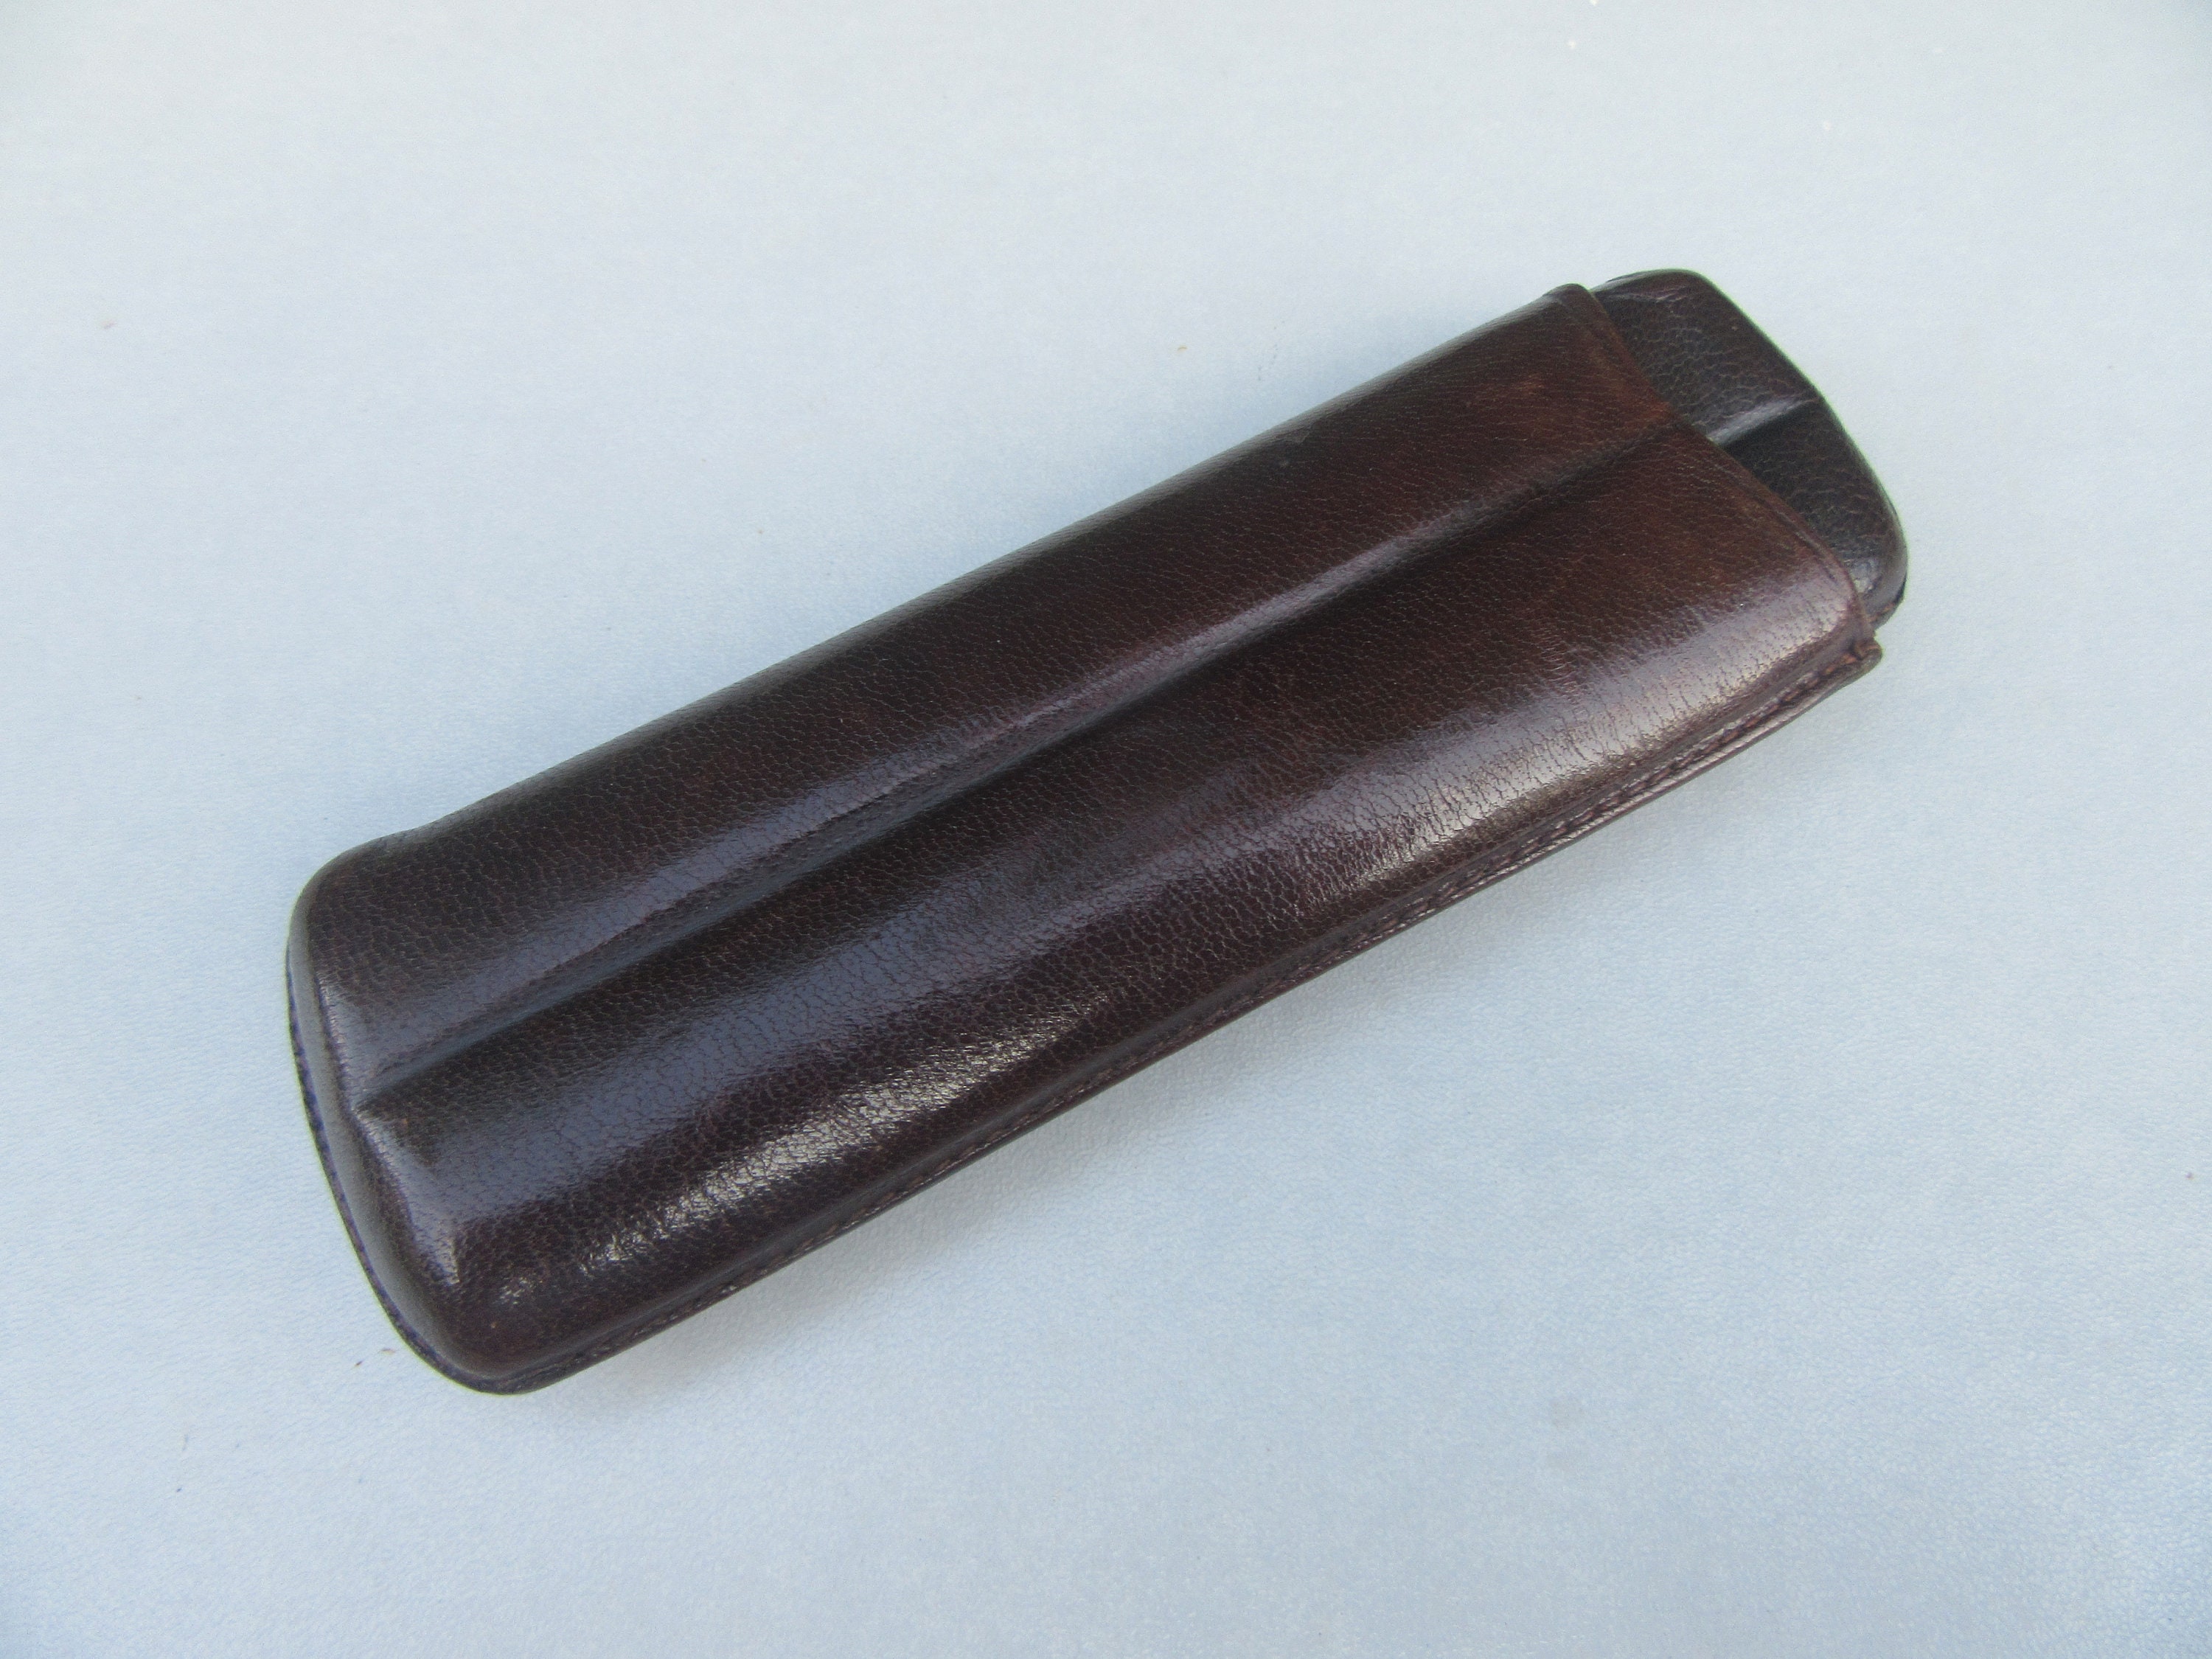 Ostrich Leather 2 Finger Evening Cigar Case in Presidential Blue